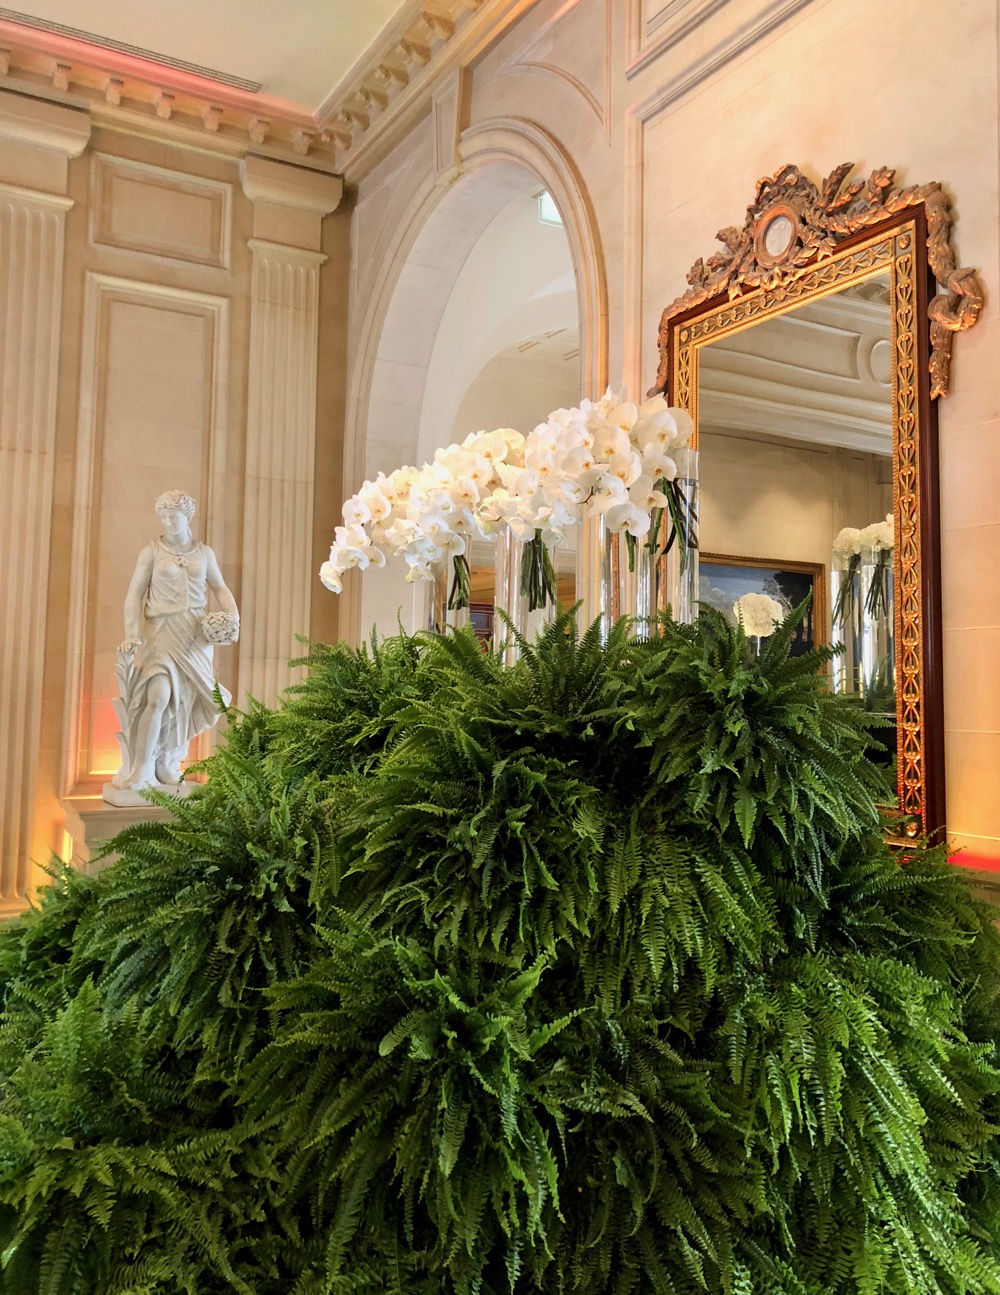 Classy colibri at the Four Seasons Hotel George V Paris, flower creations by Jeff Leatham